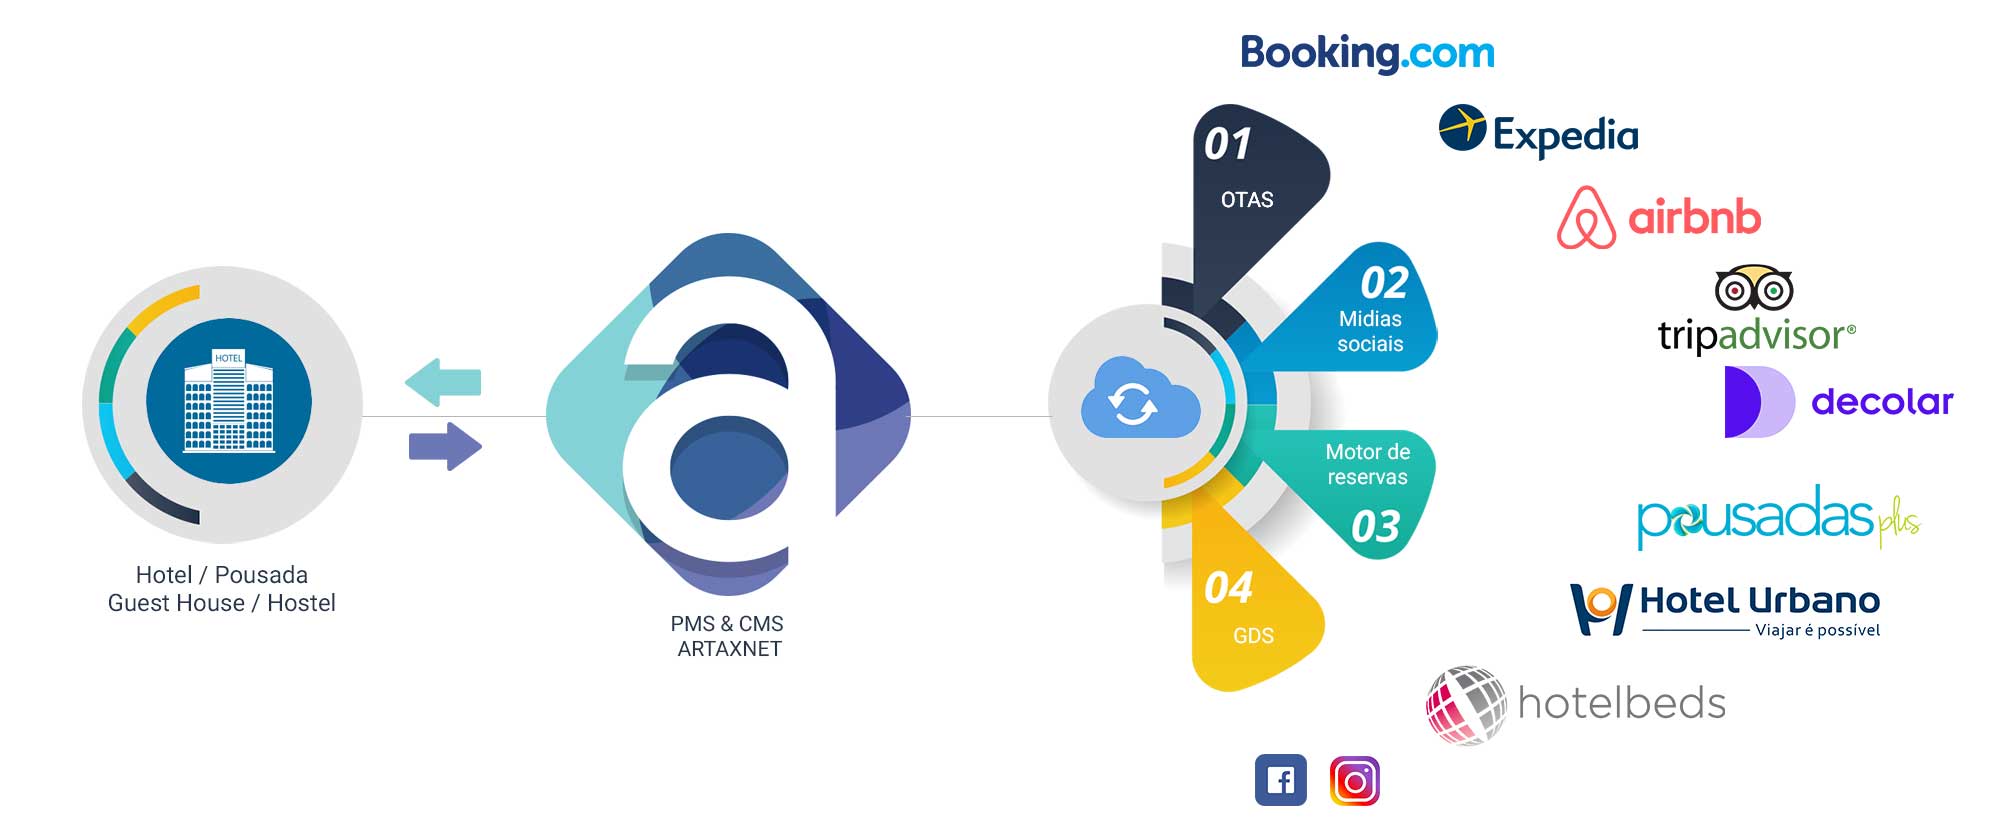 Channel Manager - Sales Channel Manager for your hotel - Without Overbookings - Channel Manager is software that automatically synchronizes availability, prices and restrictions - Artaxnet